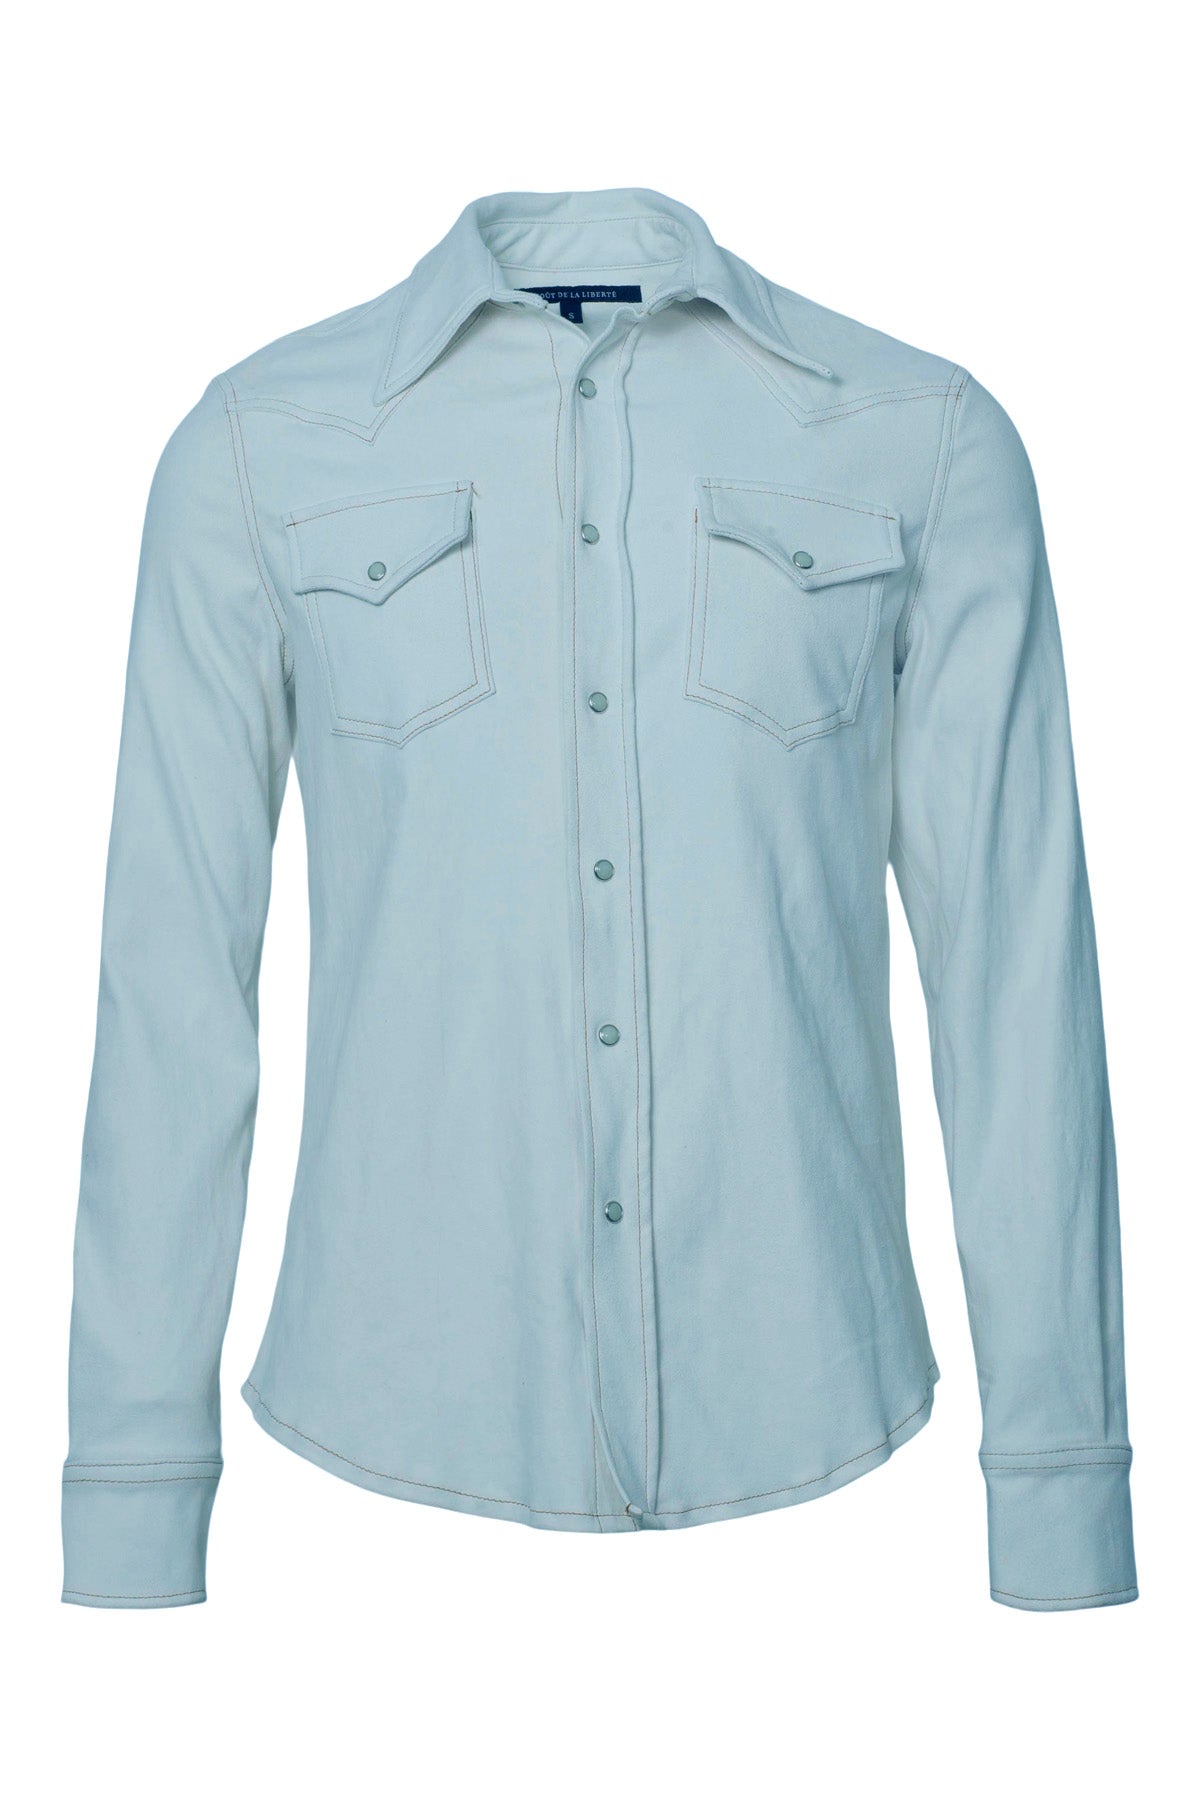 M033706_BABY BLUE 692_front